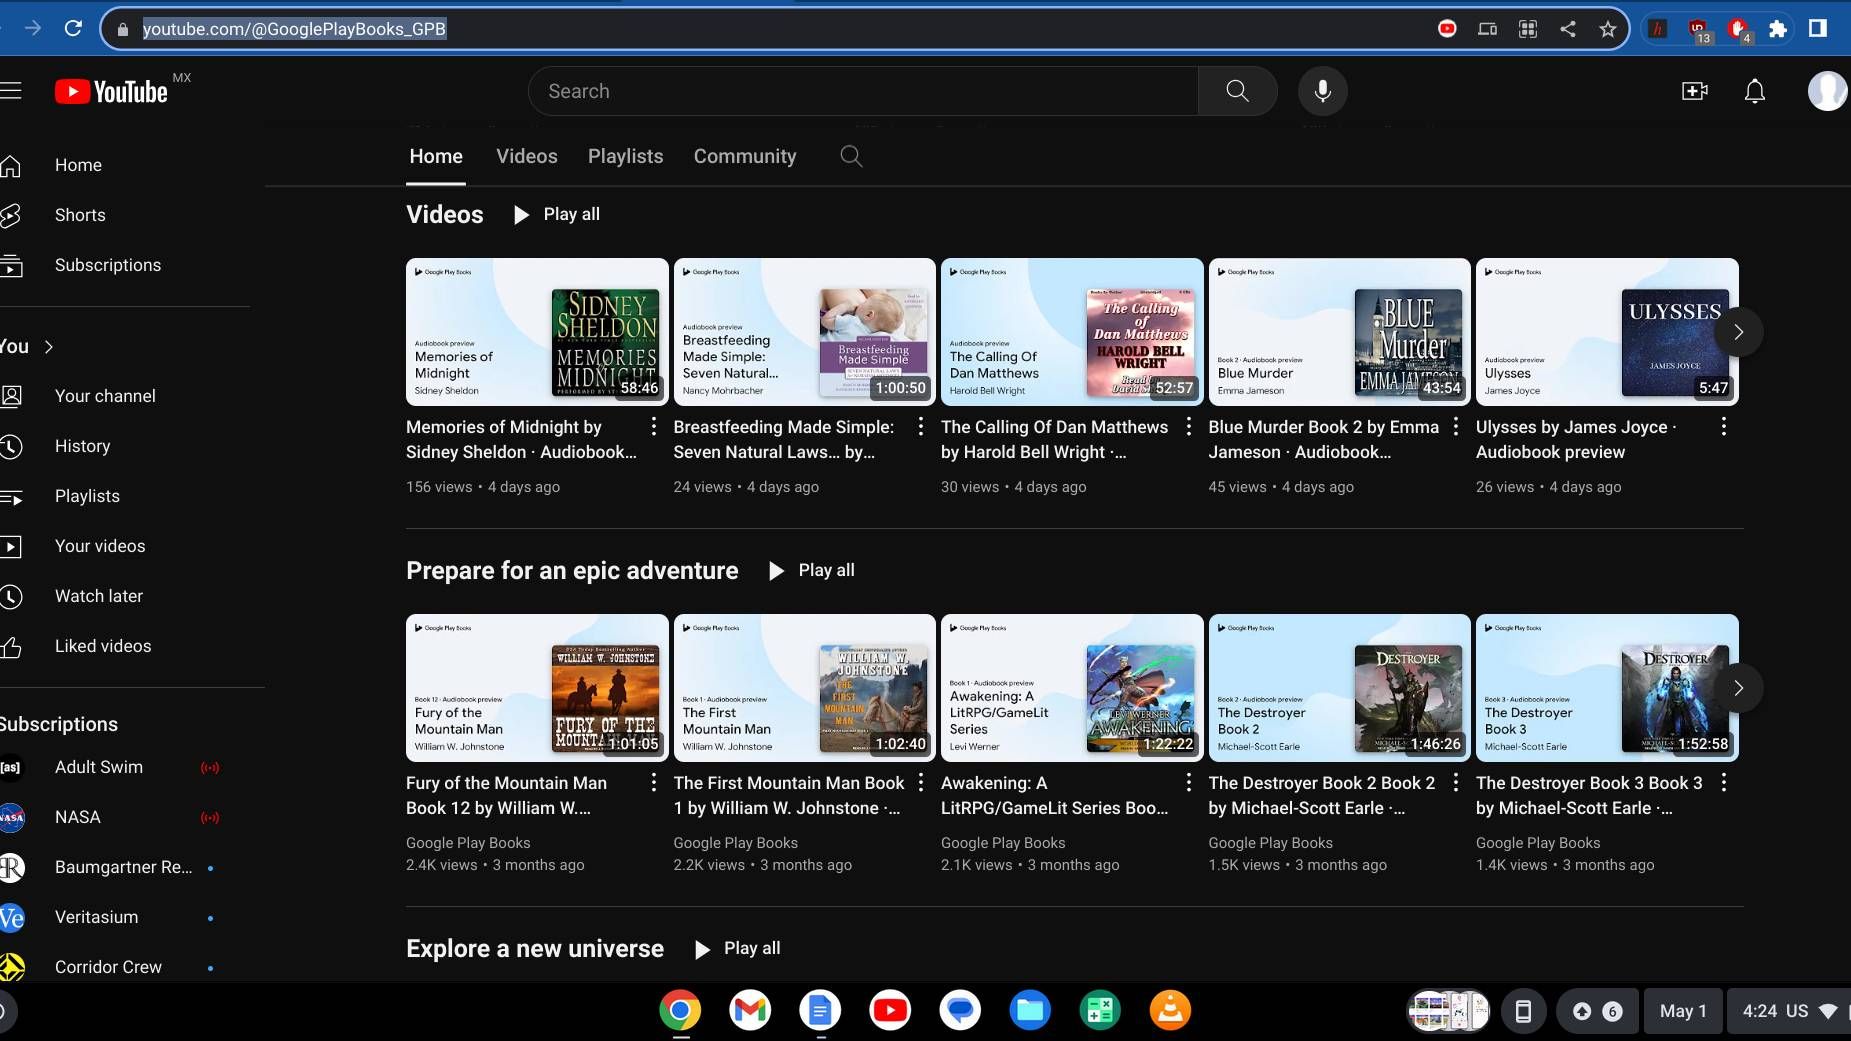 Google Play Books YouTube channel